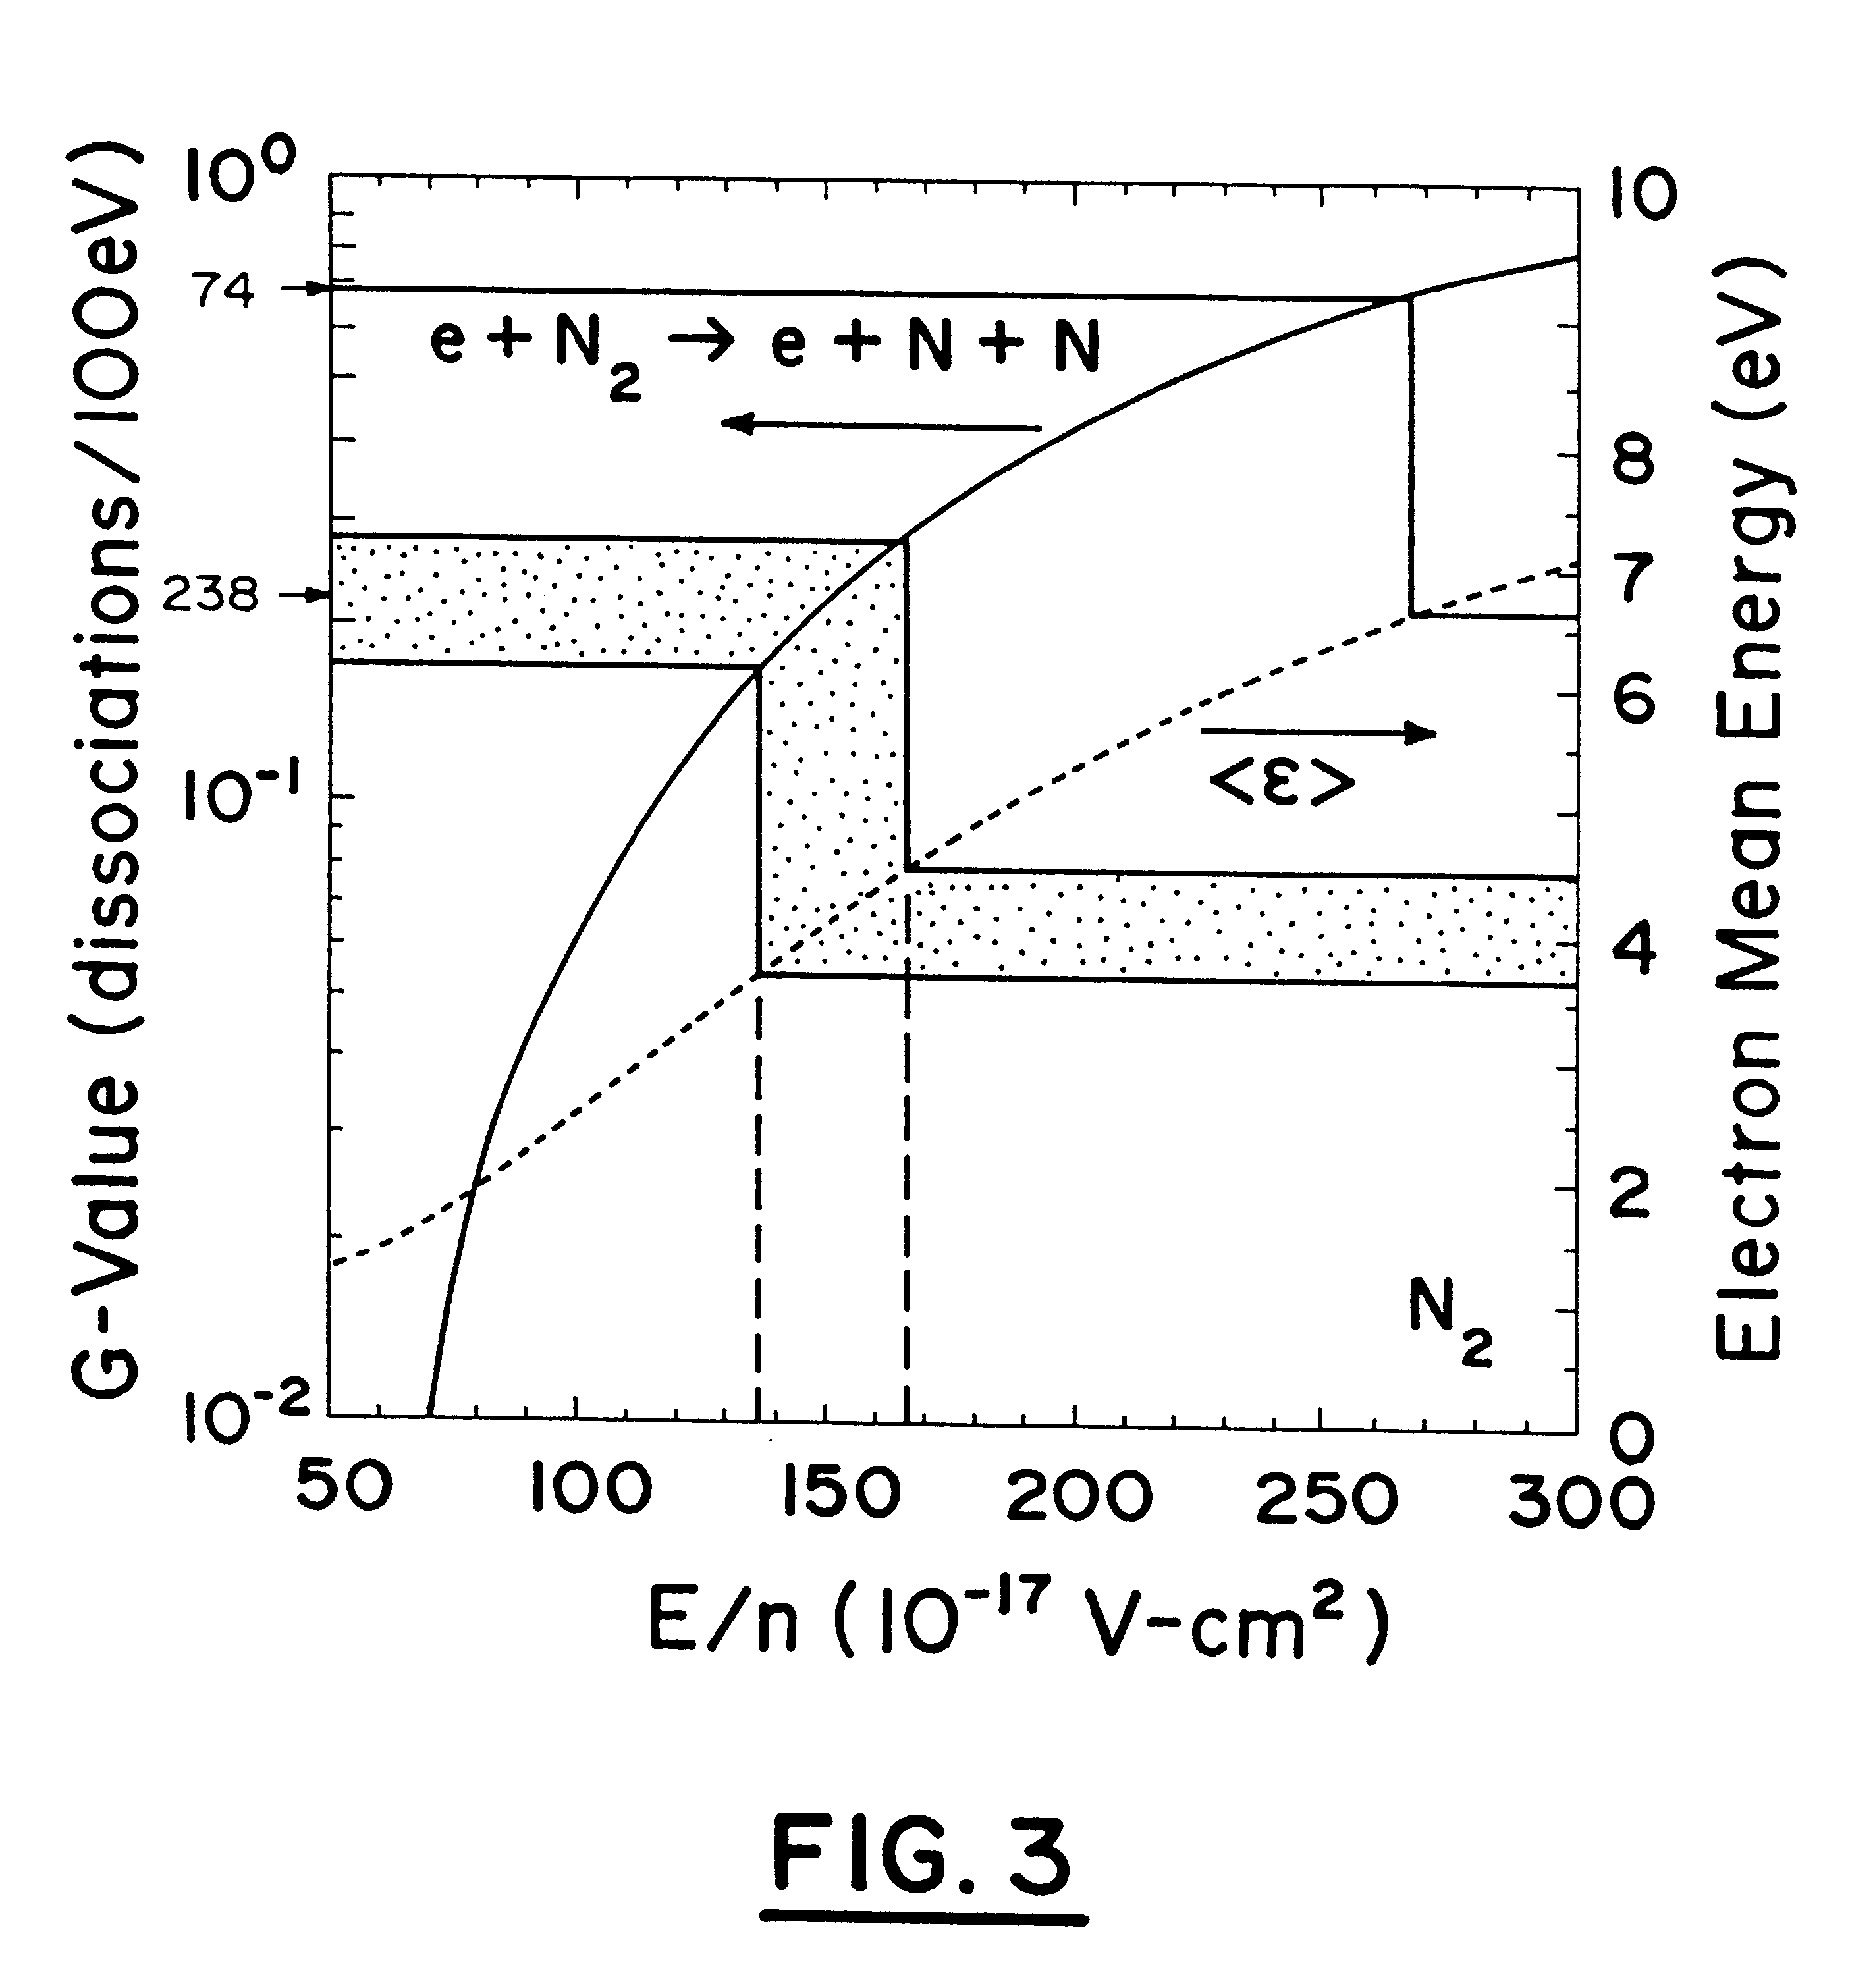 Method for generating a highly reactive plasma for exhaust gas aftertreatment and enhanced catalyst reactivity